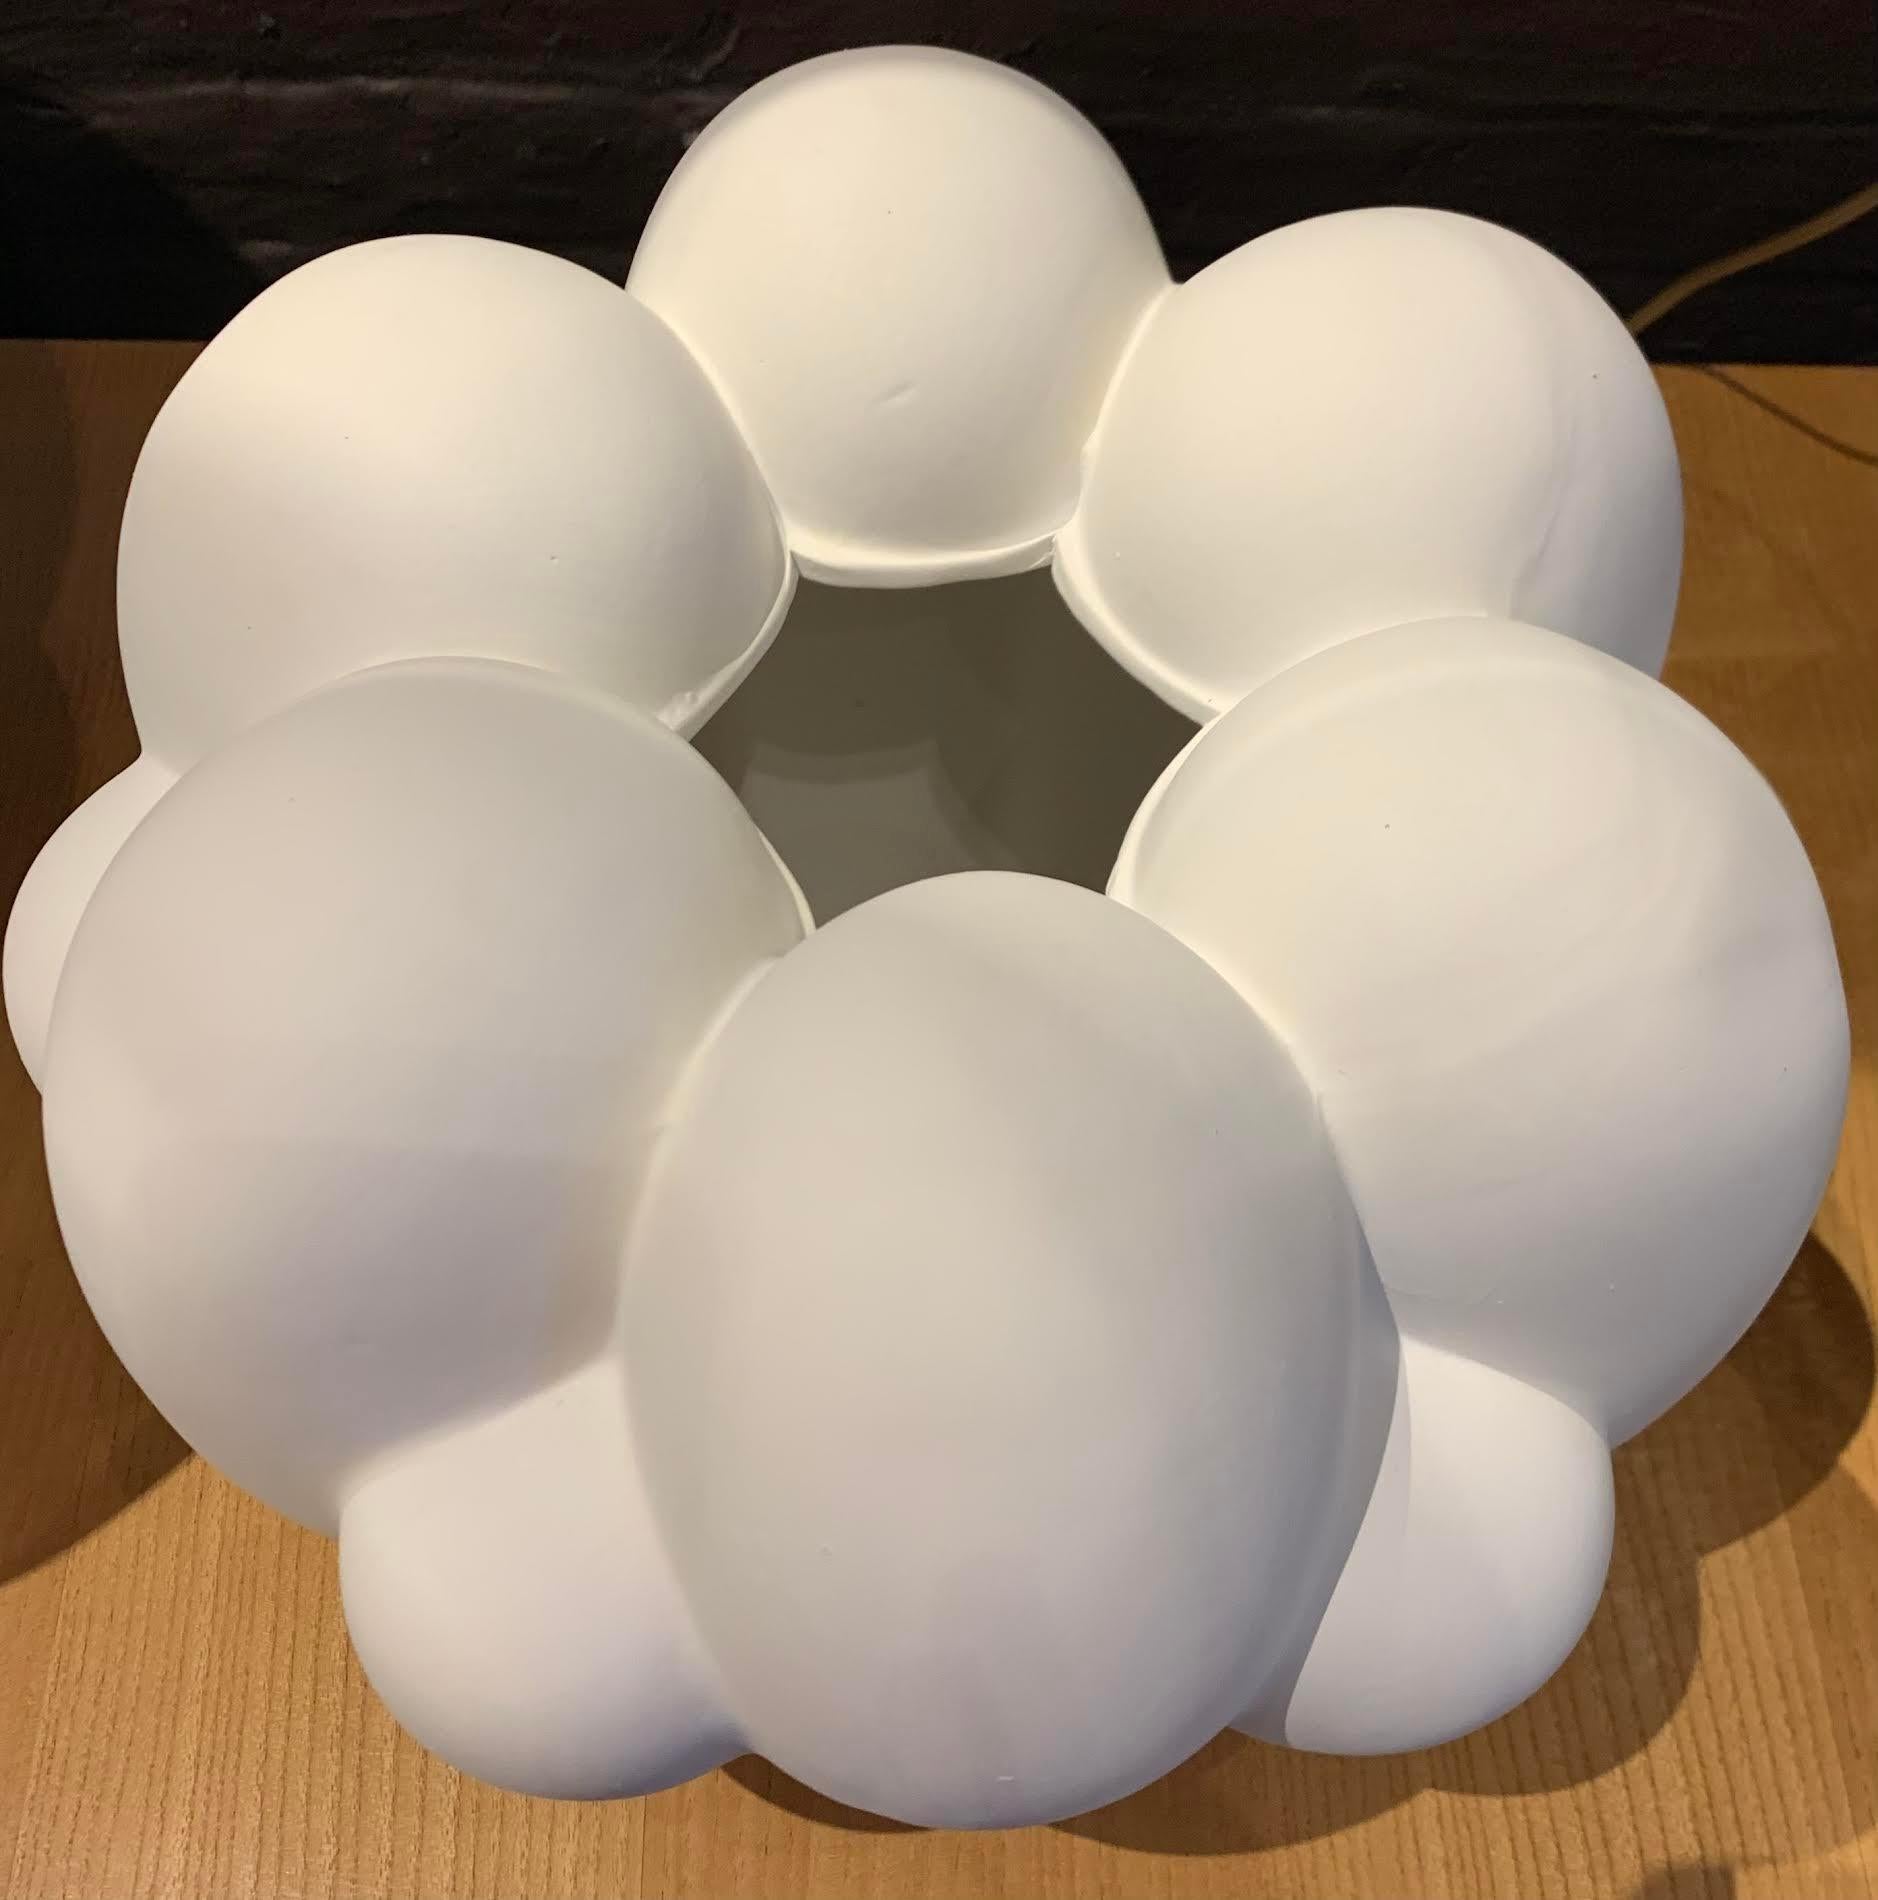 Contemporary Danish designed vase in shape of flower bloom.
Matte white glaze.
Also available in larger size (S6188).